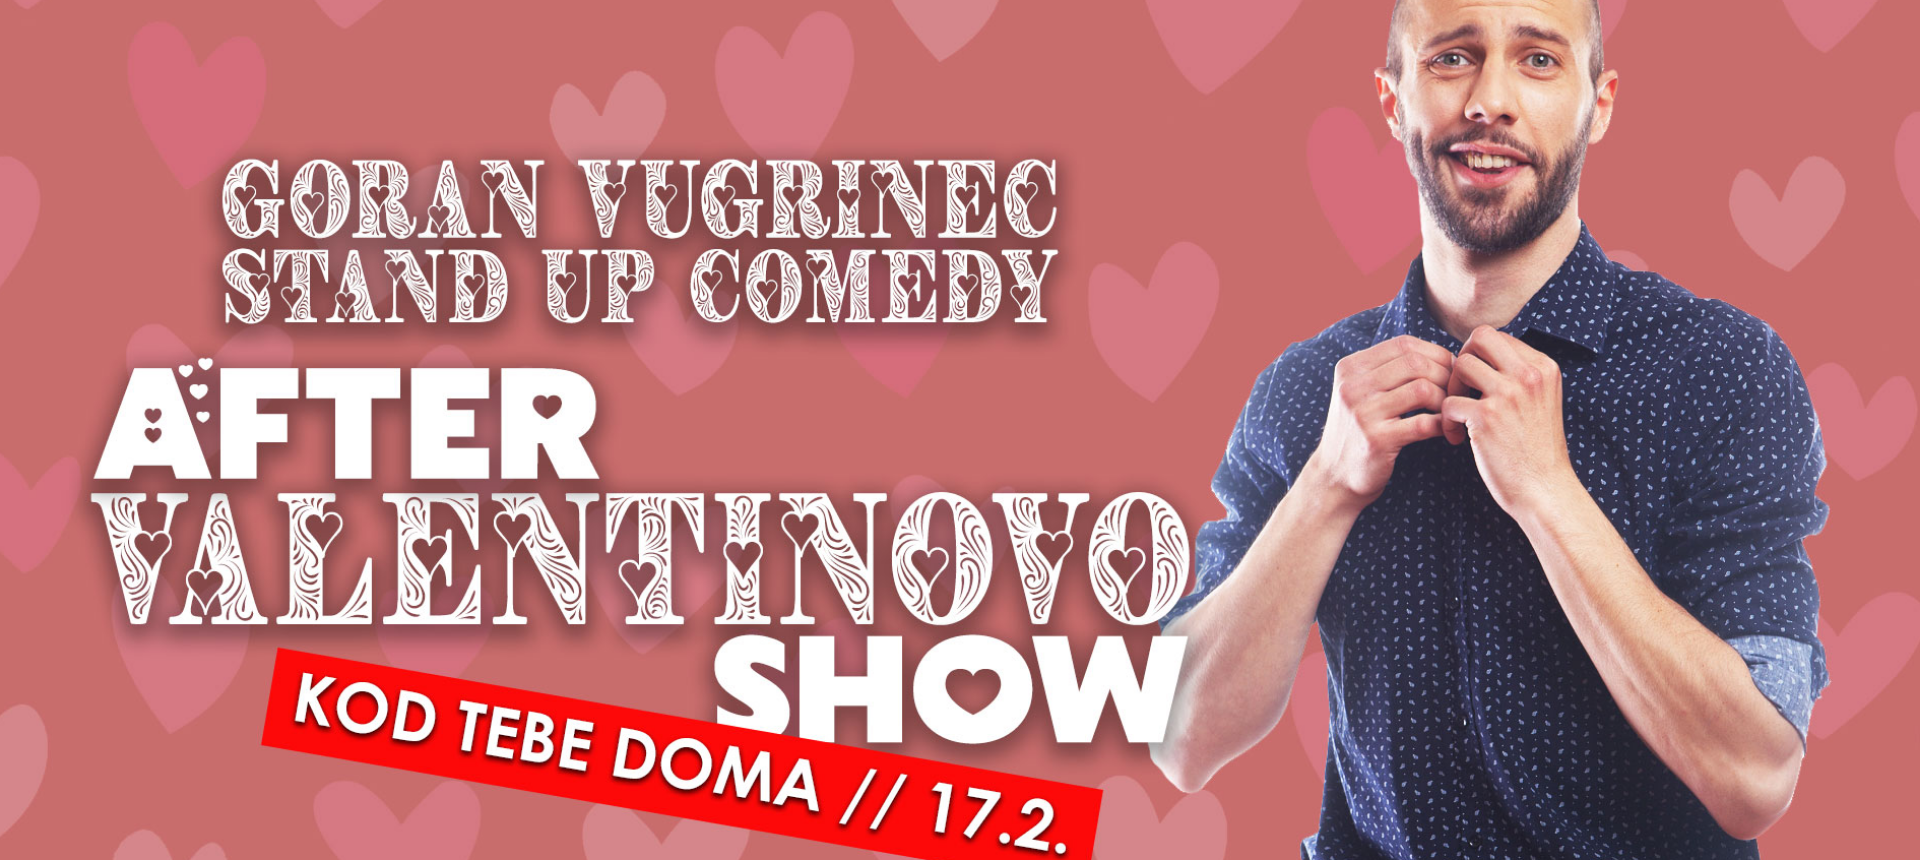 Goran Vugrinec stand-up comedy - AFTER Valentinovo SHOW - by Lajnap